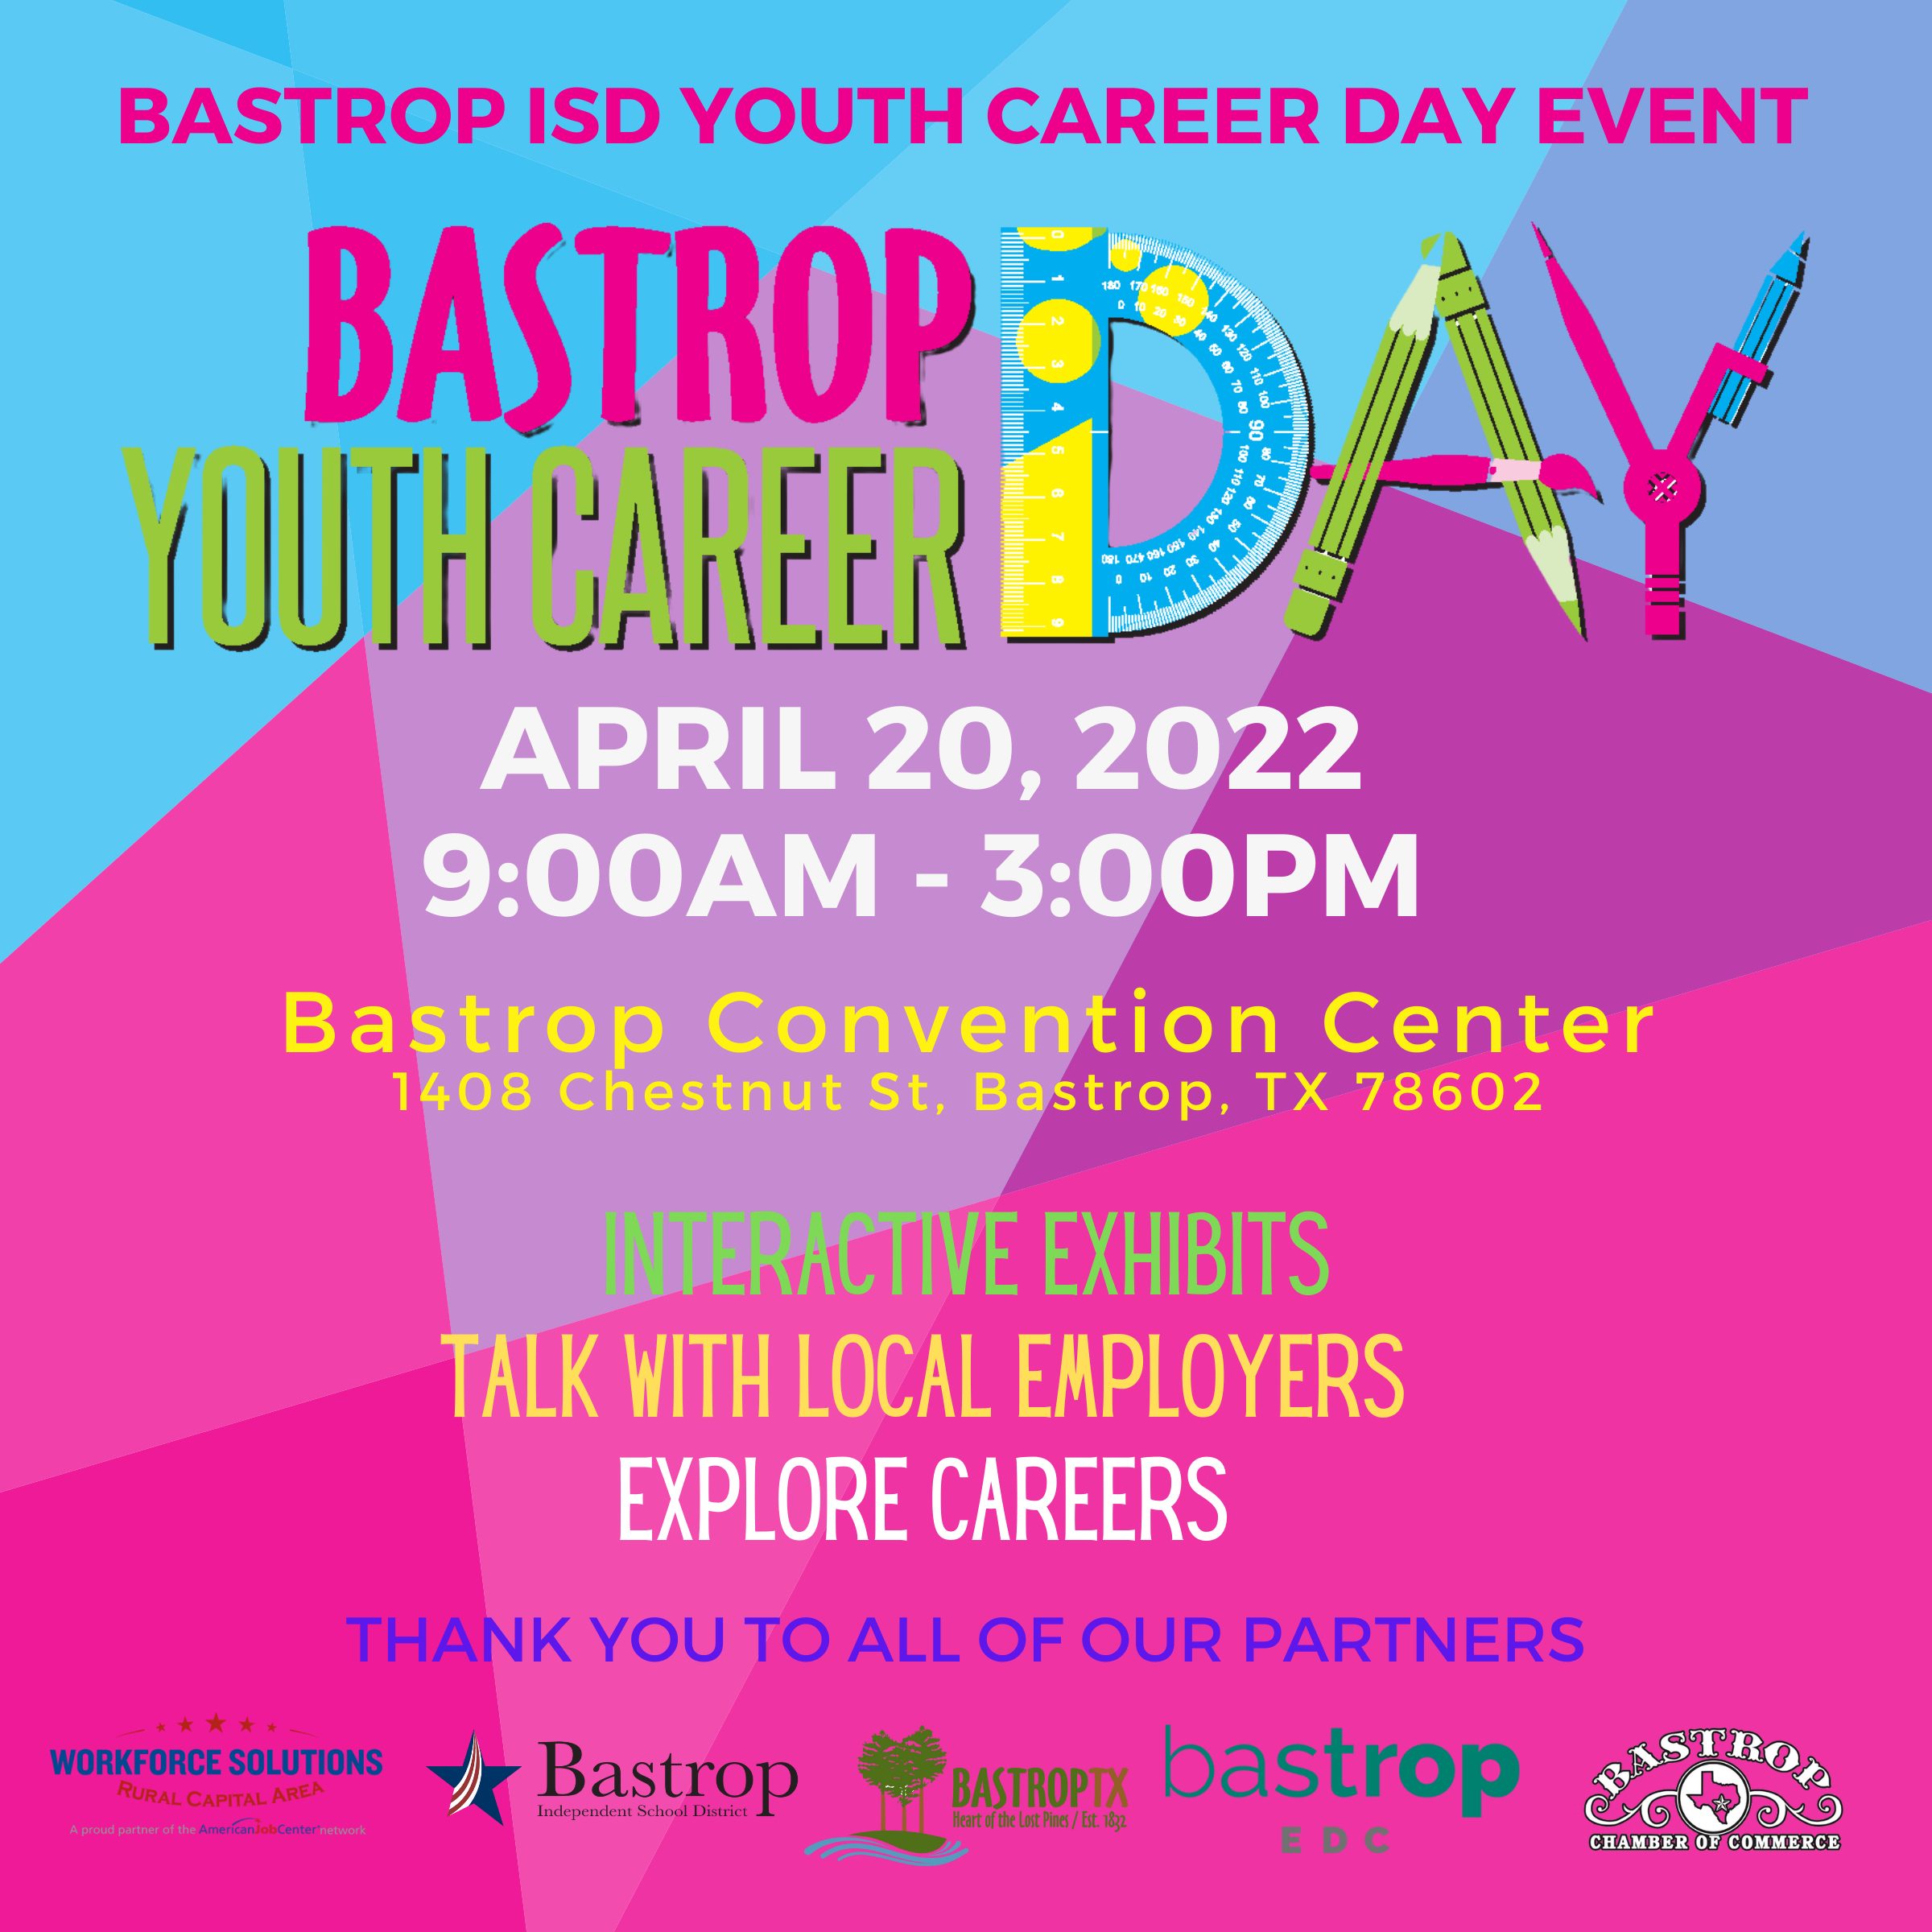 2022 BISD Youth CAREER DAY